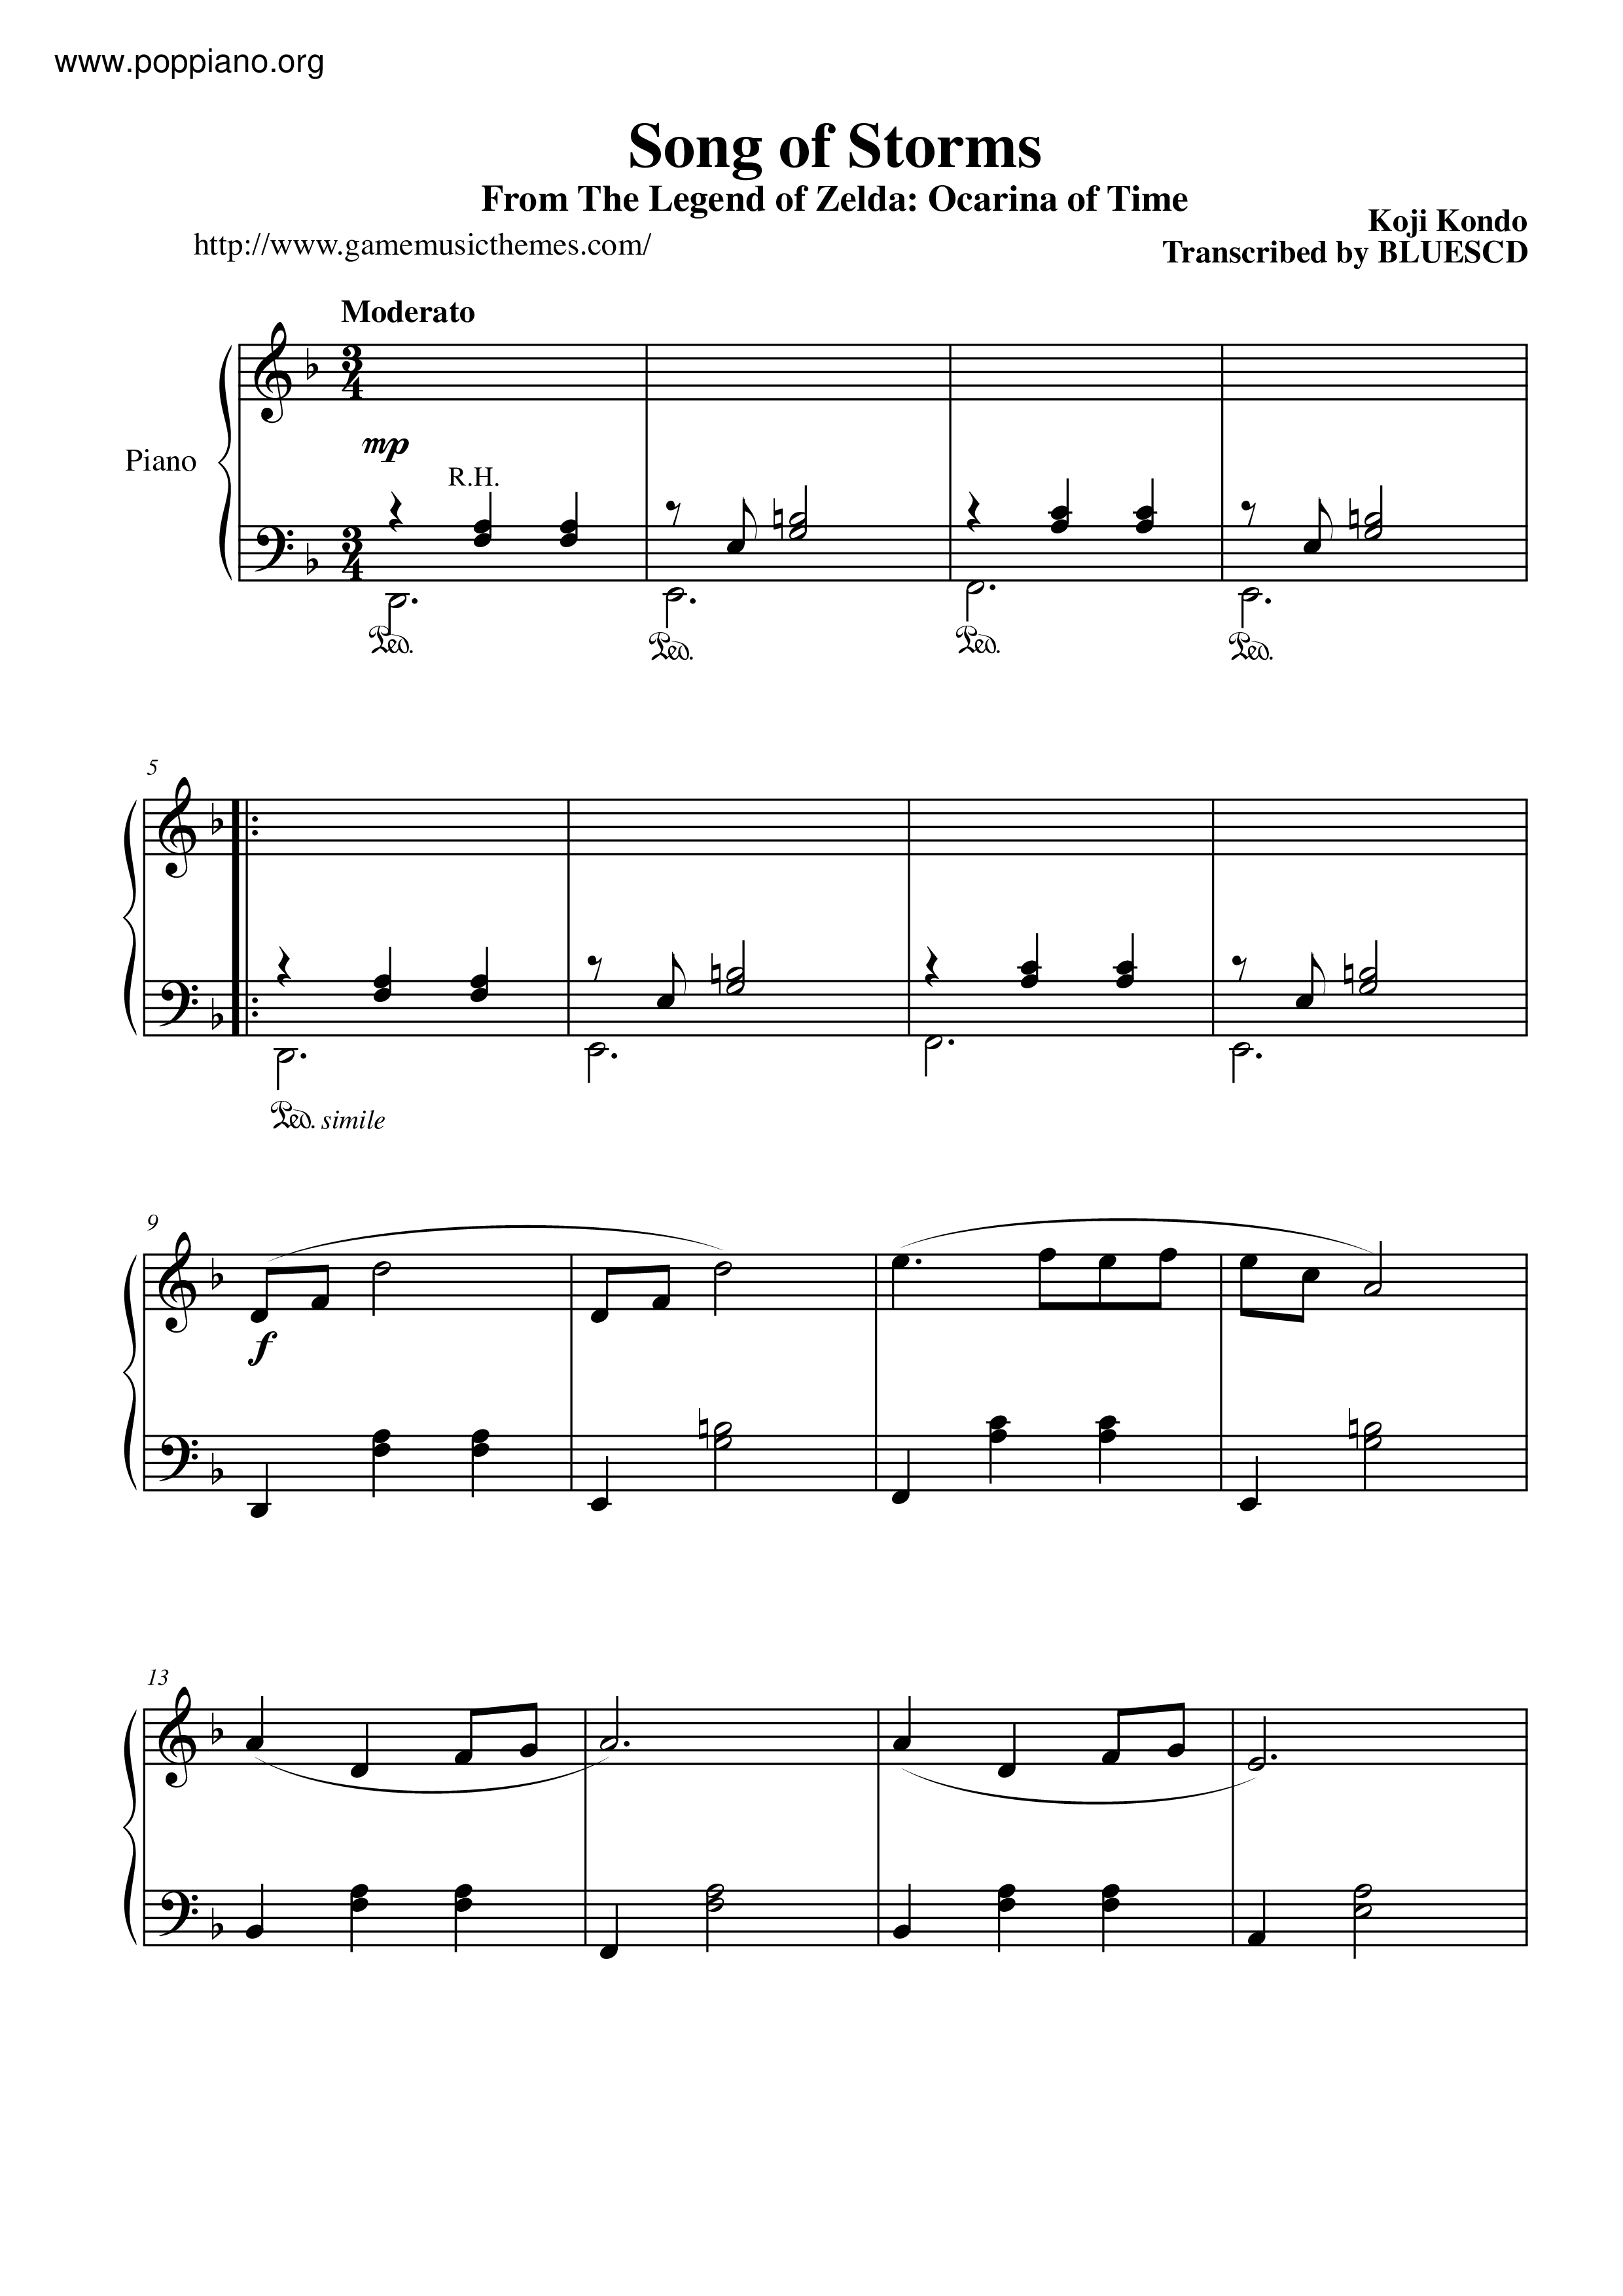 The Legend of Zelda™: Ocarina of Time™ Song of Storms: Piano: Nintendo® -  Digital Sheet Music Download